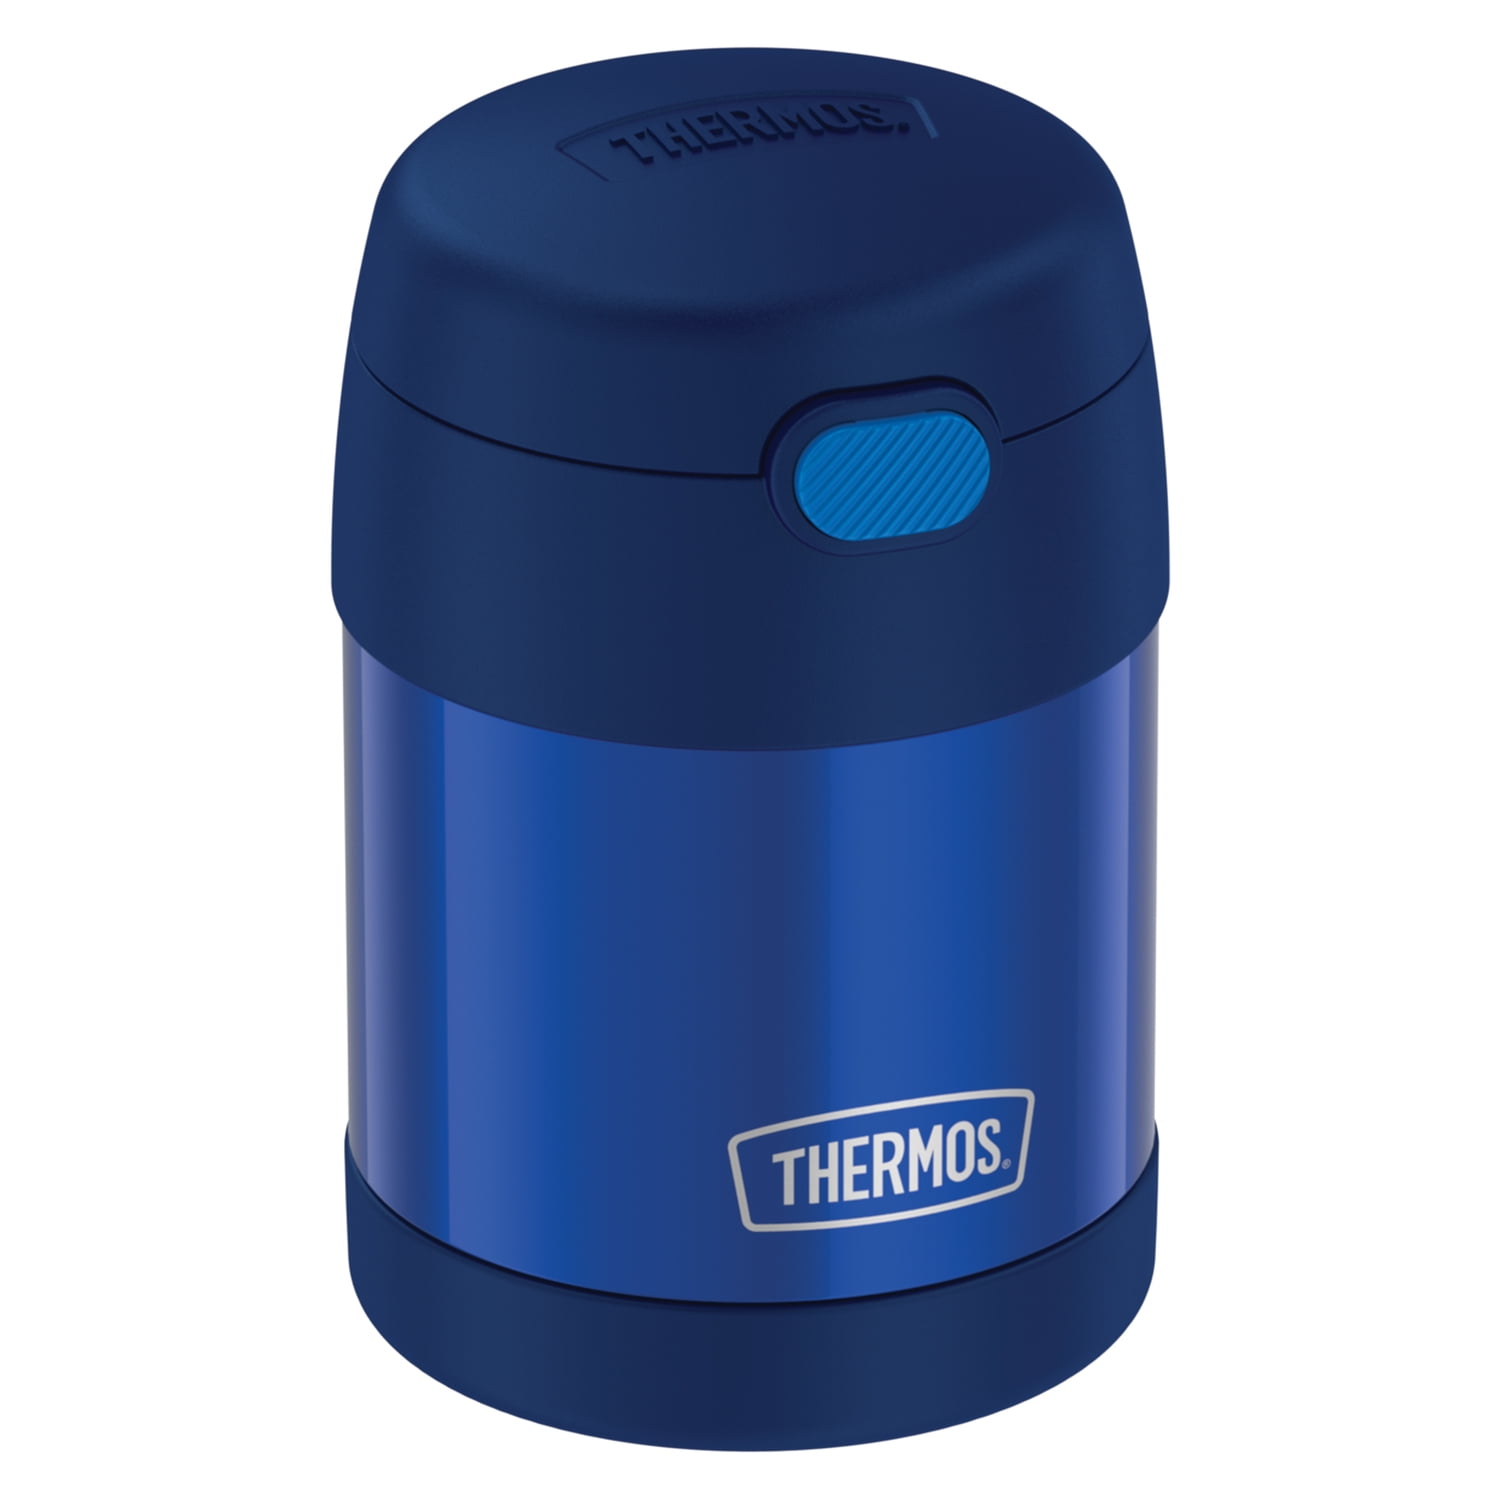 Food Funtainer Jar Thermos 10 Ounce Oz Capacity Stainless Steel Insulated Blue